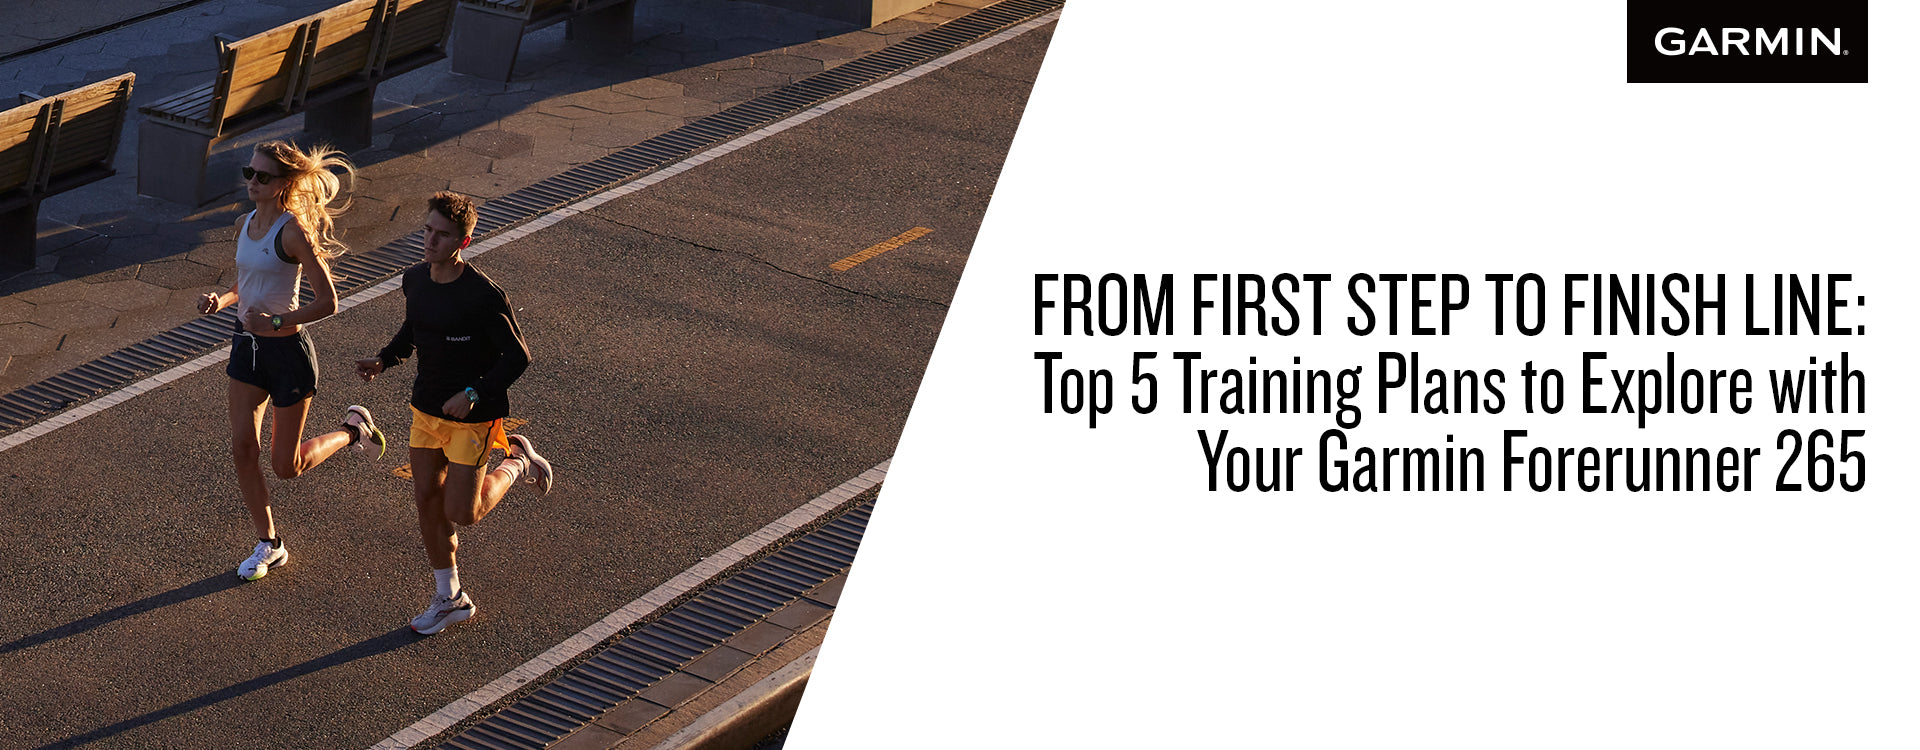 From First Step to Finish Line: Top 5 Training Plans to Explore with Your Garmin Forerunner 265